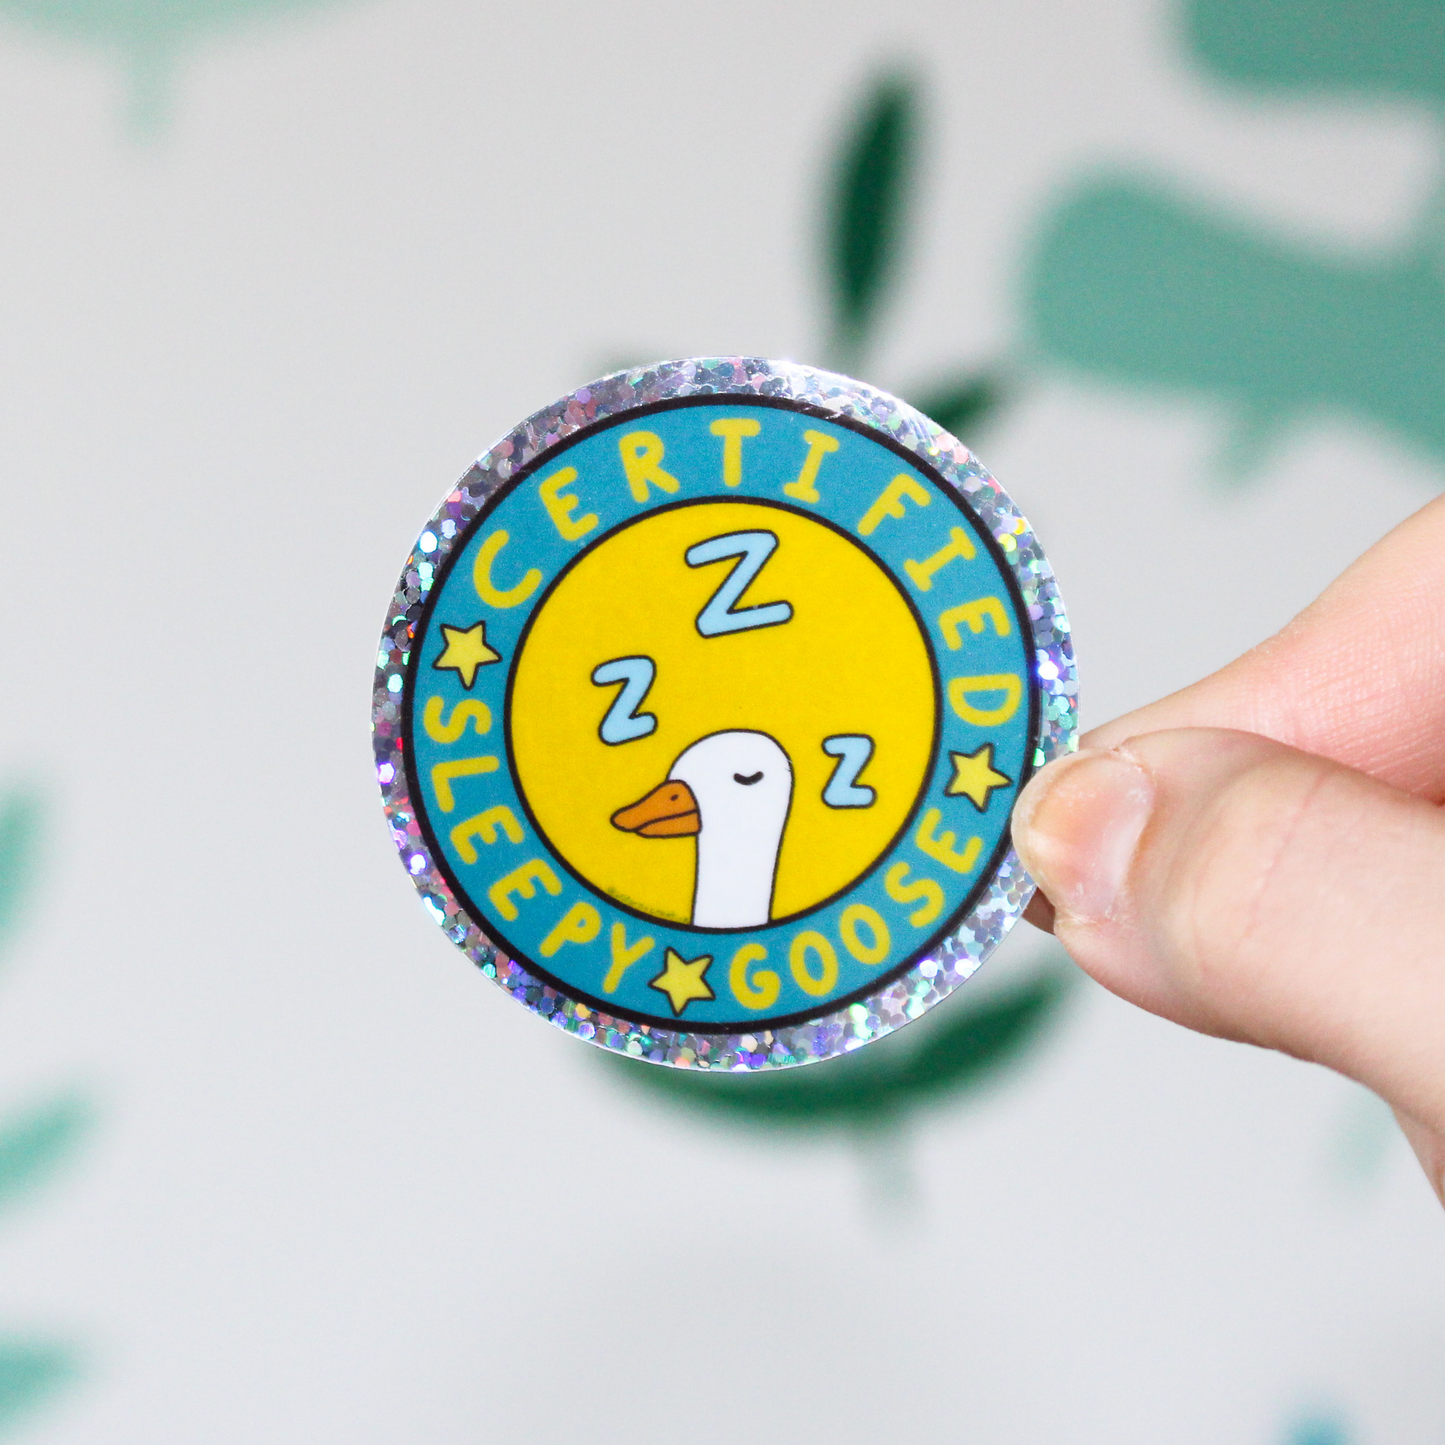 A hand holding a circle holographic sticker that has Certified Sleepy Goose written in a circle with stars and a white goose with Z's sleeping on a yellow background. Behind the sticker is a blurred leaf pattern.